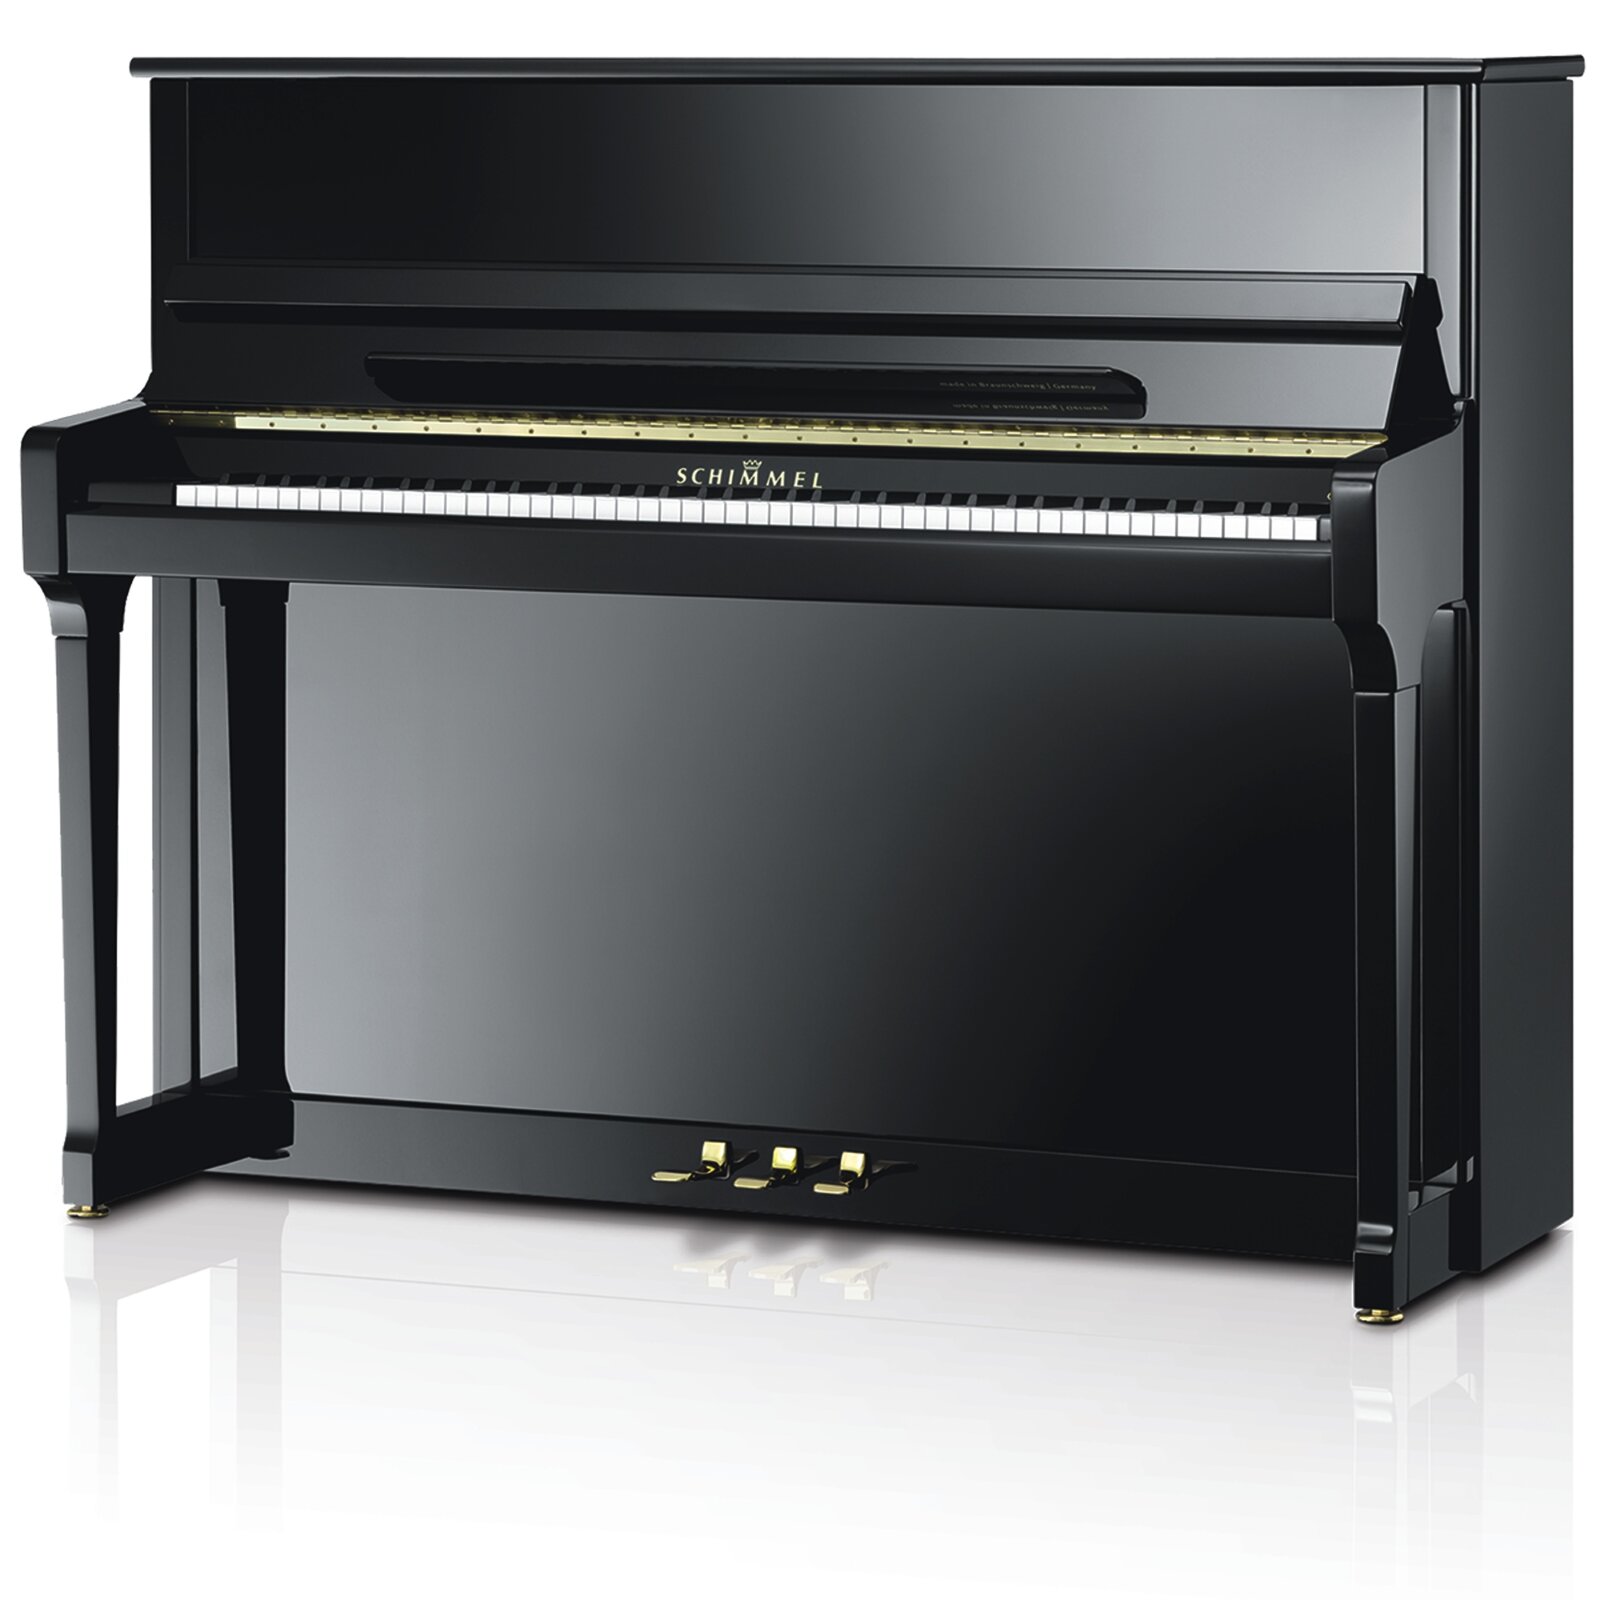 Schimmel C121 Tradition Classic Glossy black + TwinTone silencer system : photo 1